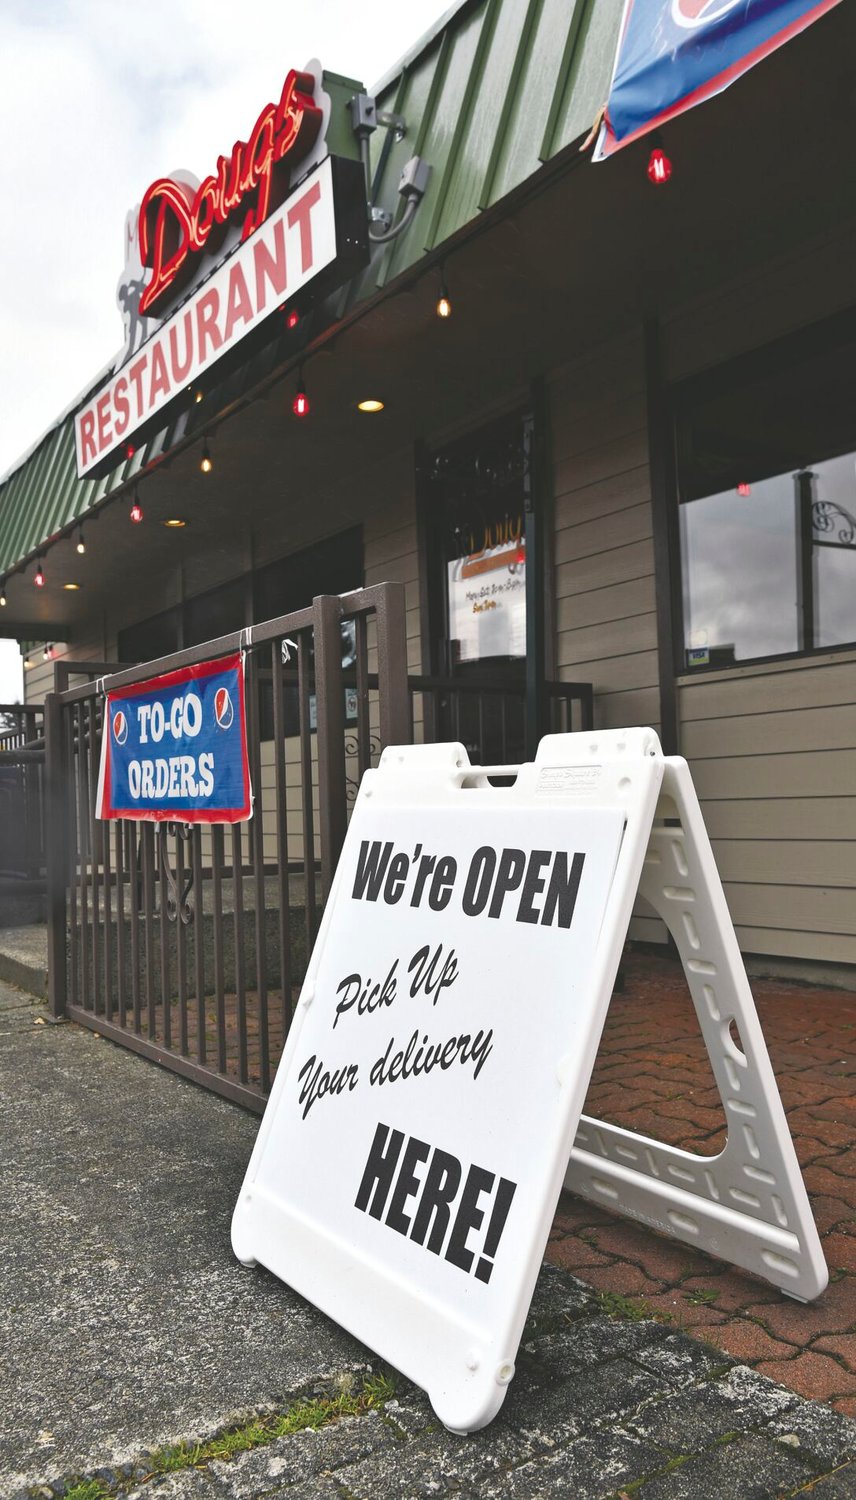 Mr. Dougs Family Restaurant in Yelm is offering to-go food orders during the COVID-19 business restrictions that prohibit indoor restaurant seating.